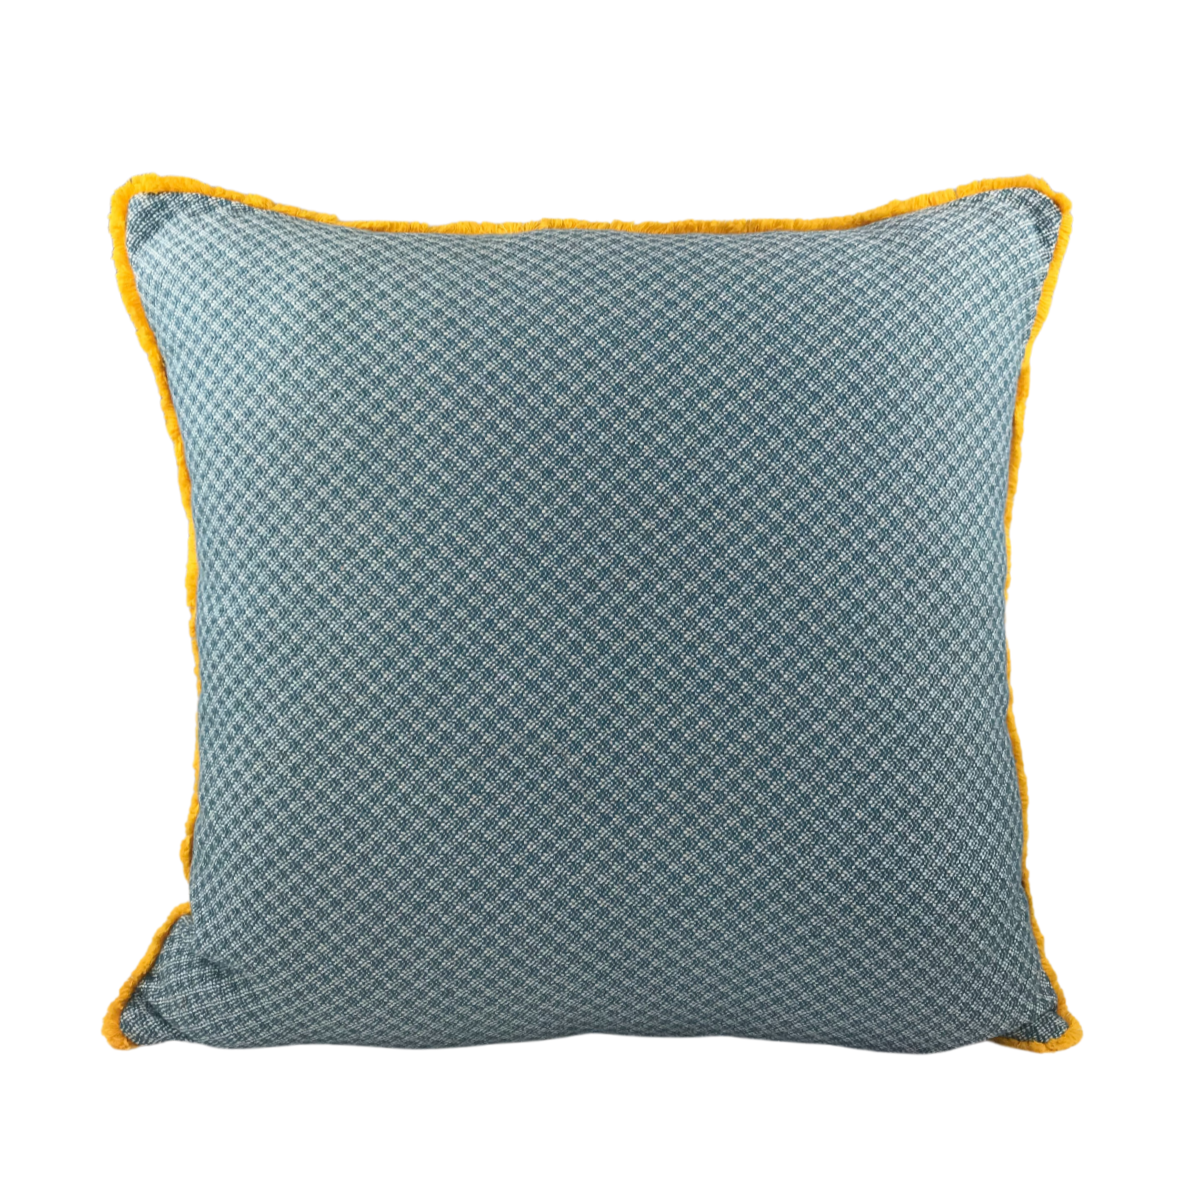 Cushion MUDELL 50x50 Pattern Blue with Yellow Fringe